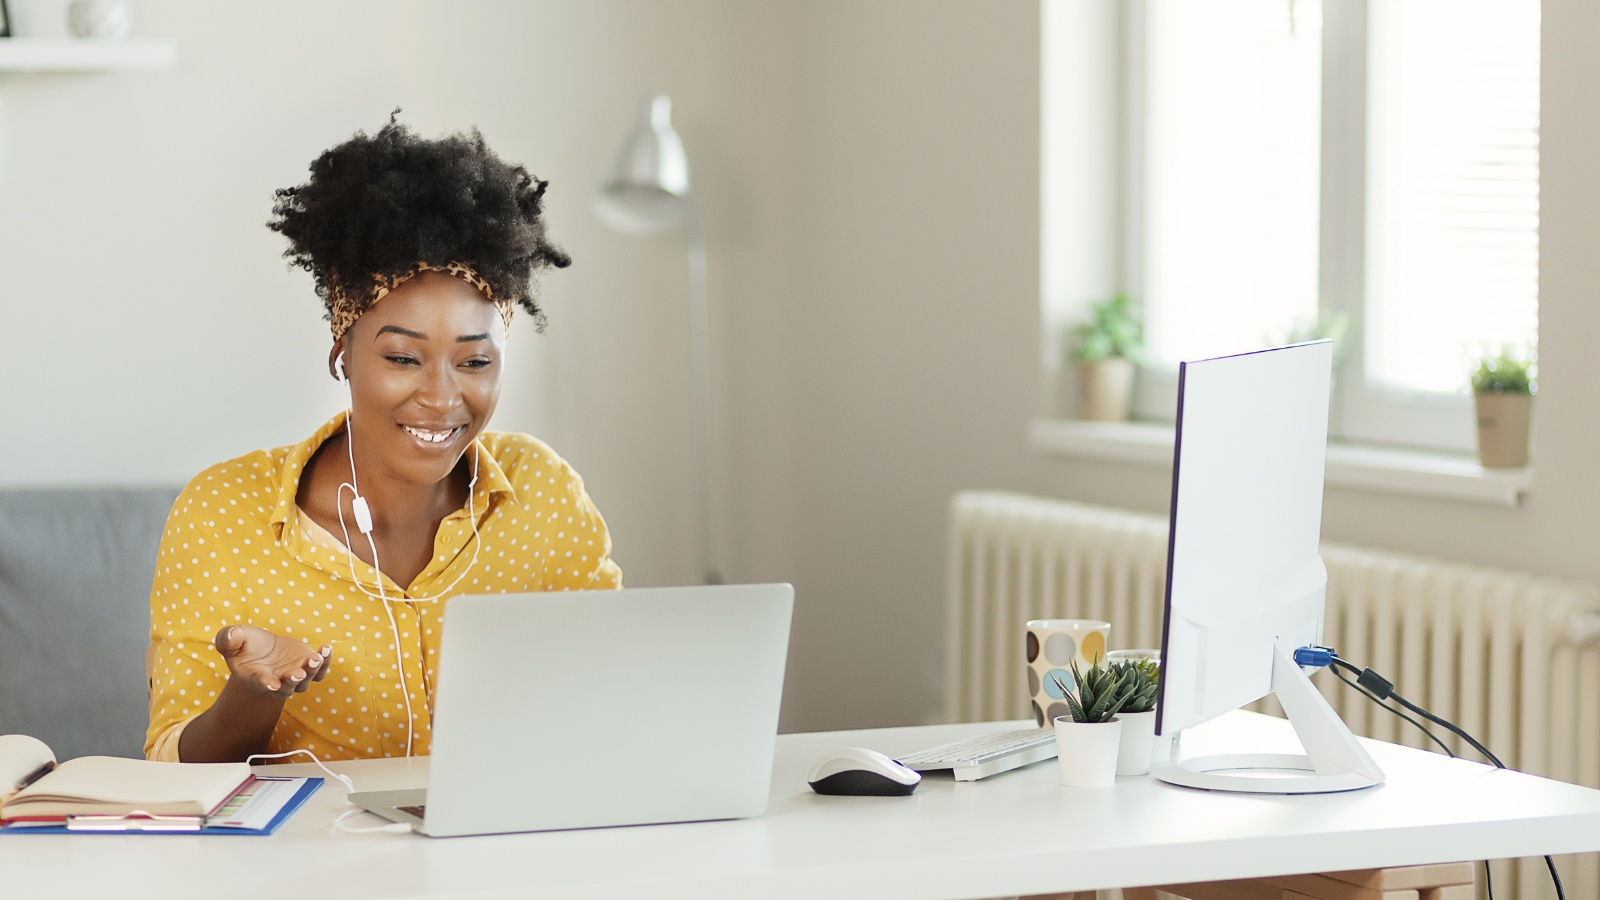 How To Give Effective Performance Feedback In the Work-From-Home Environment